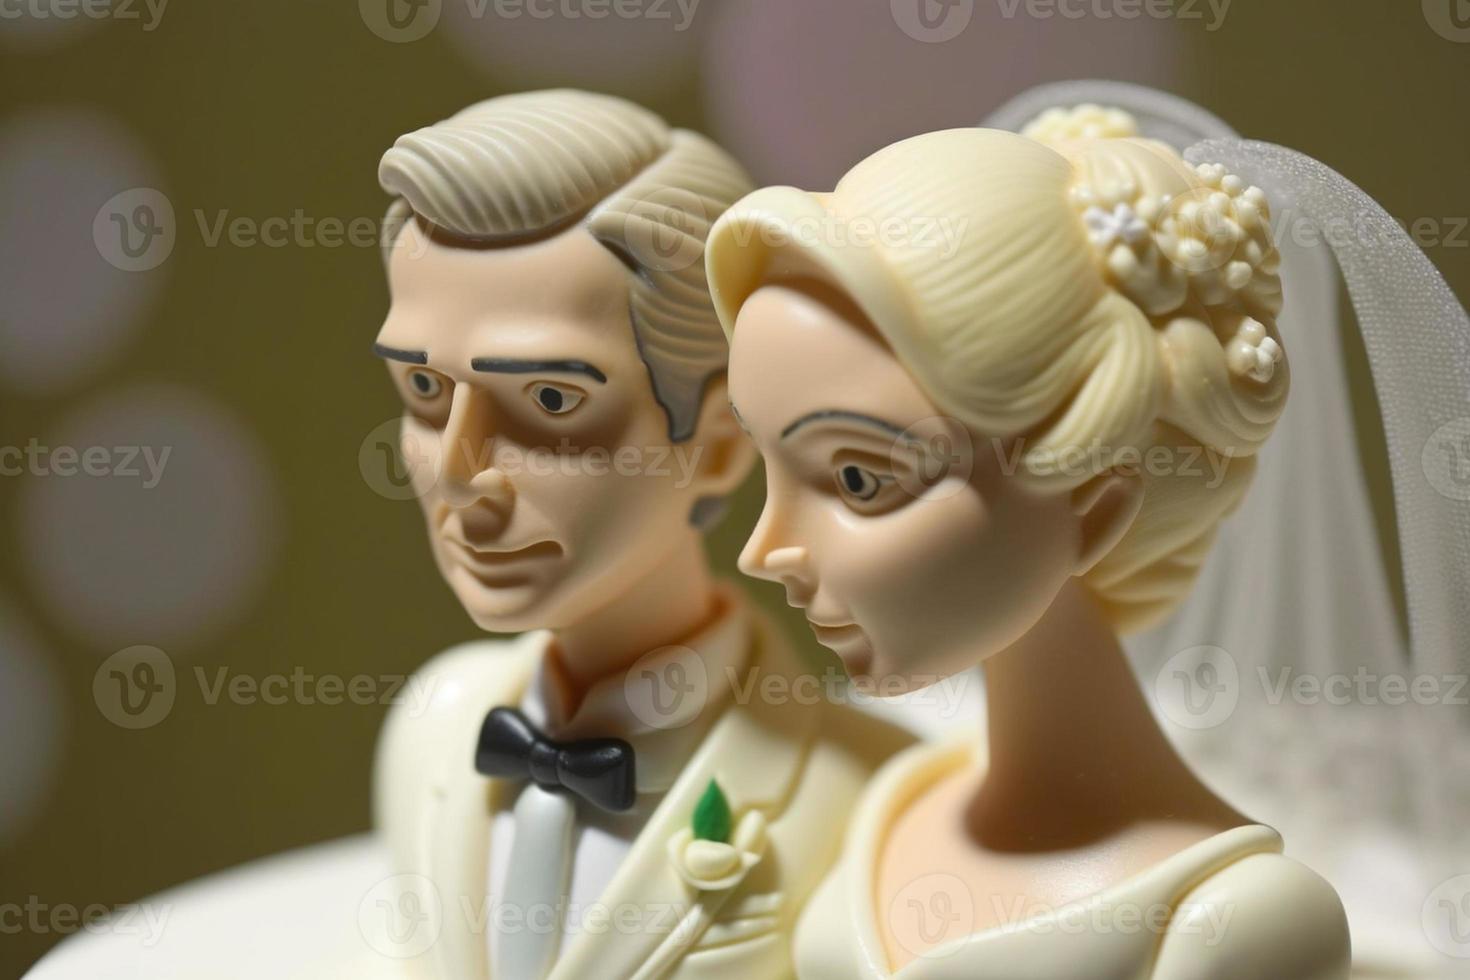 Bride and Groom on top of cake or dolls on top of cake. Nostalgia and memories of a good happy marriage photo